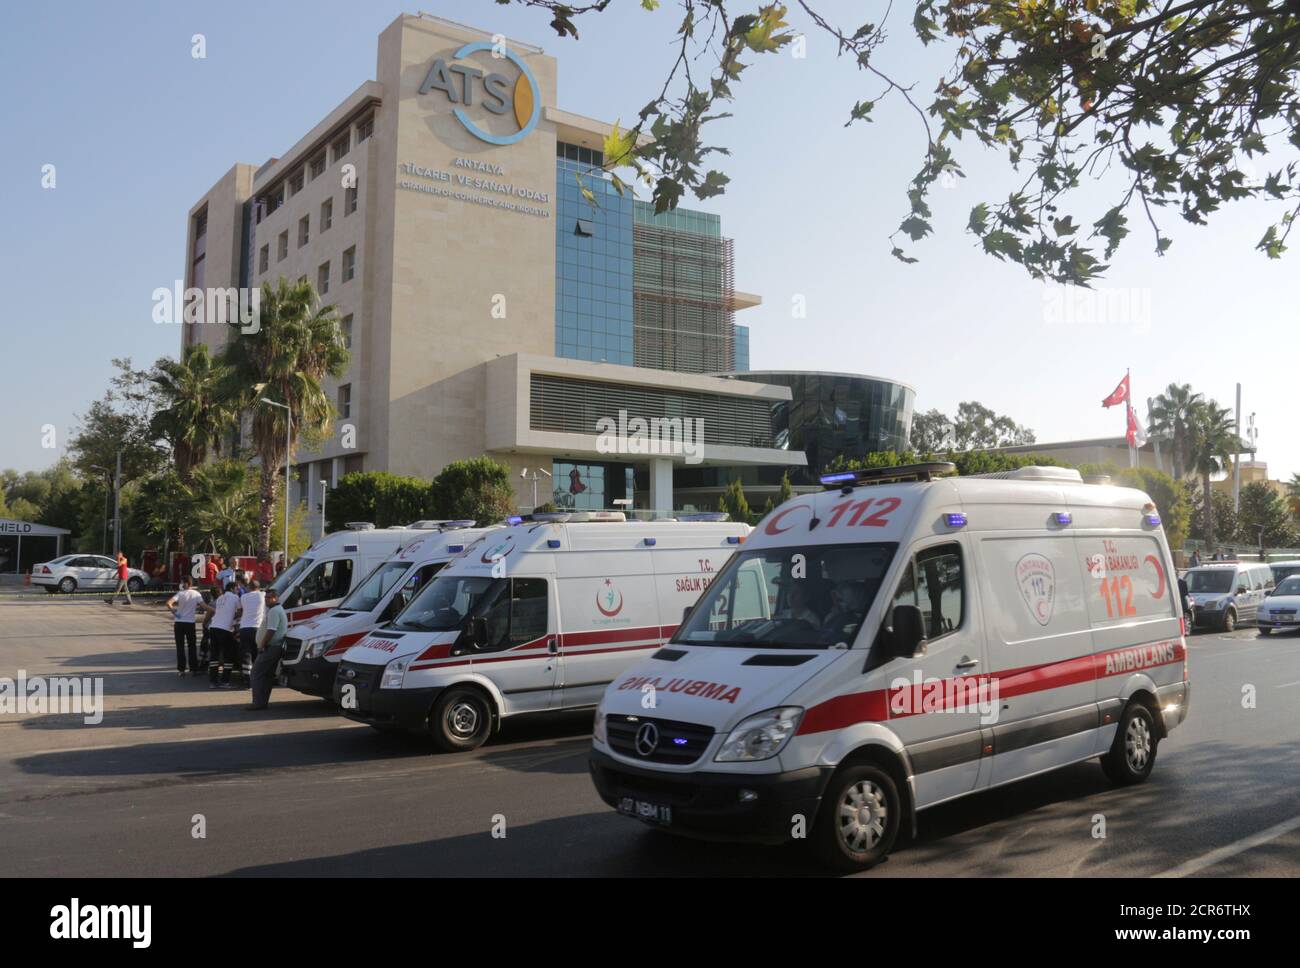 Ambulances are parked in front of the Antalya Chamber of Commerce and Industry (ATSO) headquarters after a blast in the Mediterranean resort city of Antalya, Turkey, October 25, 2016. REUTERS/Kaan Soyturk Stock Photo